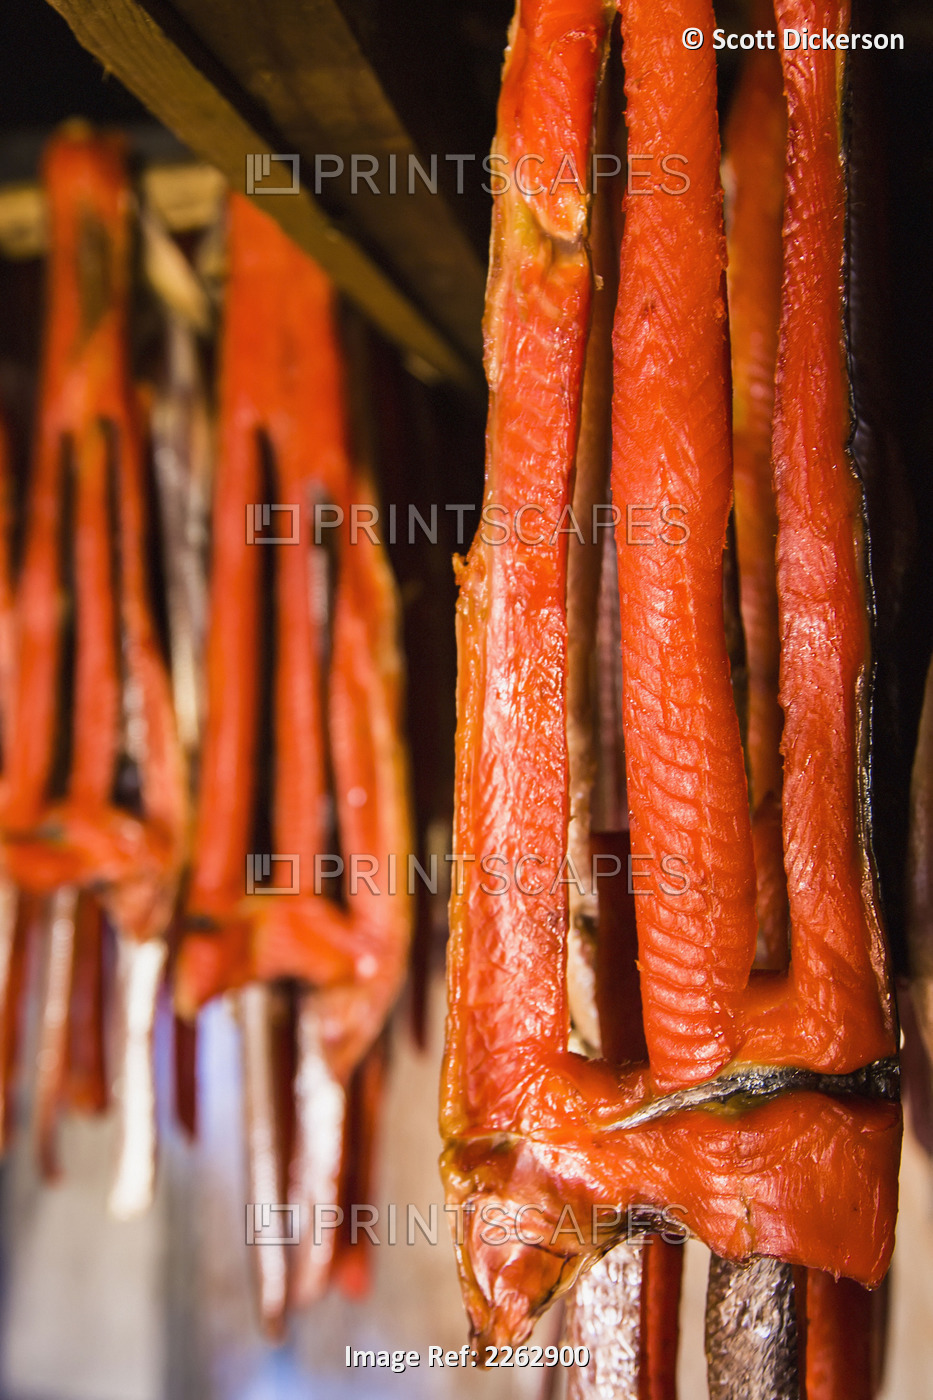 Sockeye salmon from the kvichak river that has been stripped and hung to dry ...